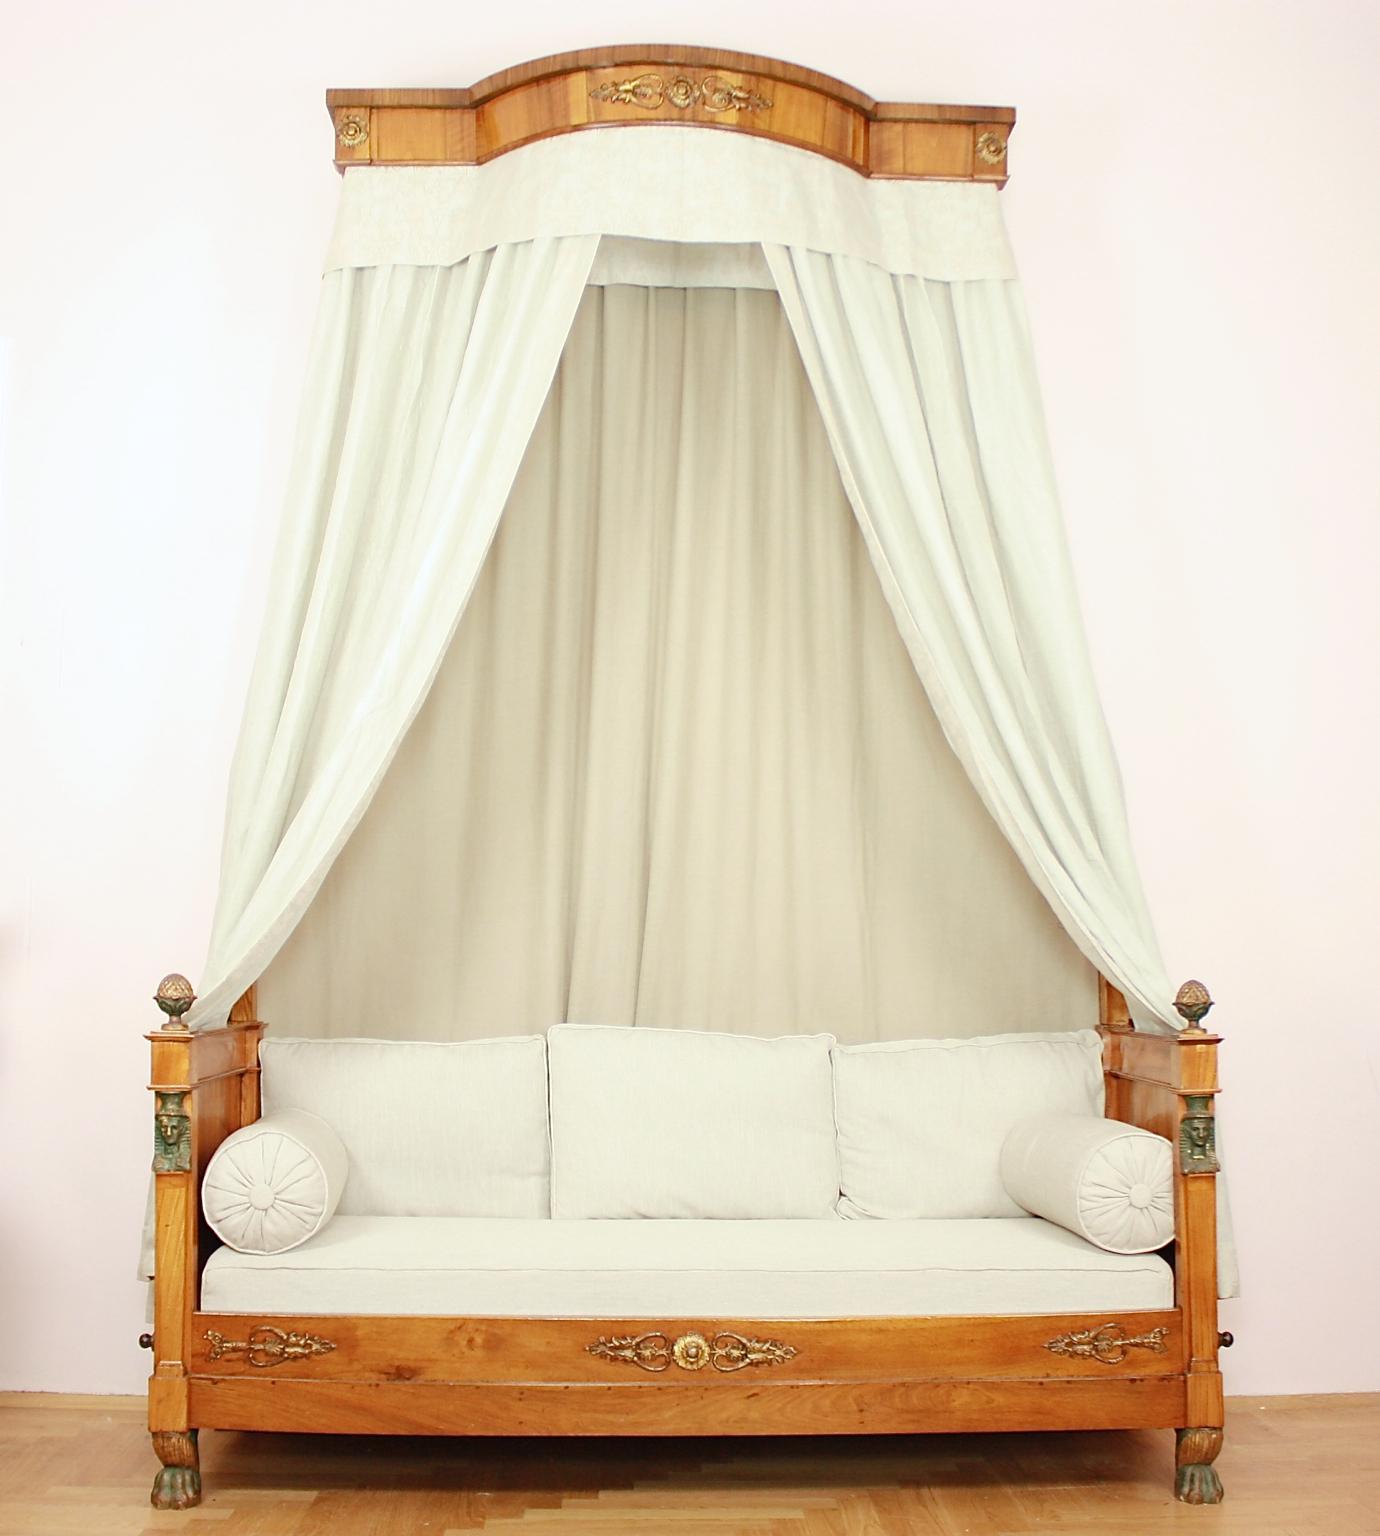 French Empire Egyptian Revival Daybed with Demilune Canopy, circa 1815

A rare Empire daybed à 'l'Égyptienne